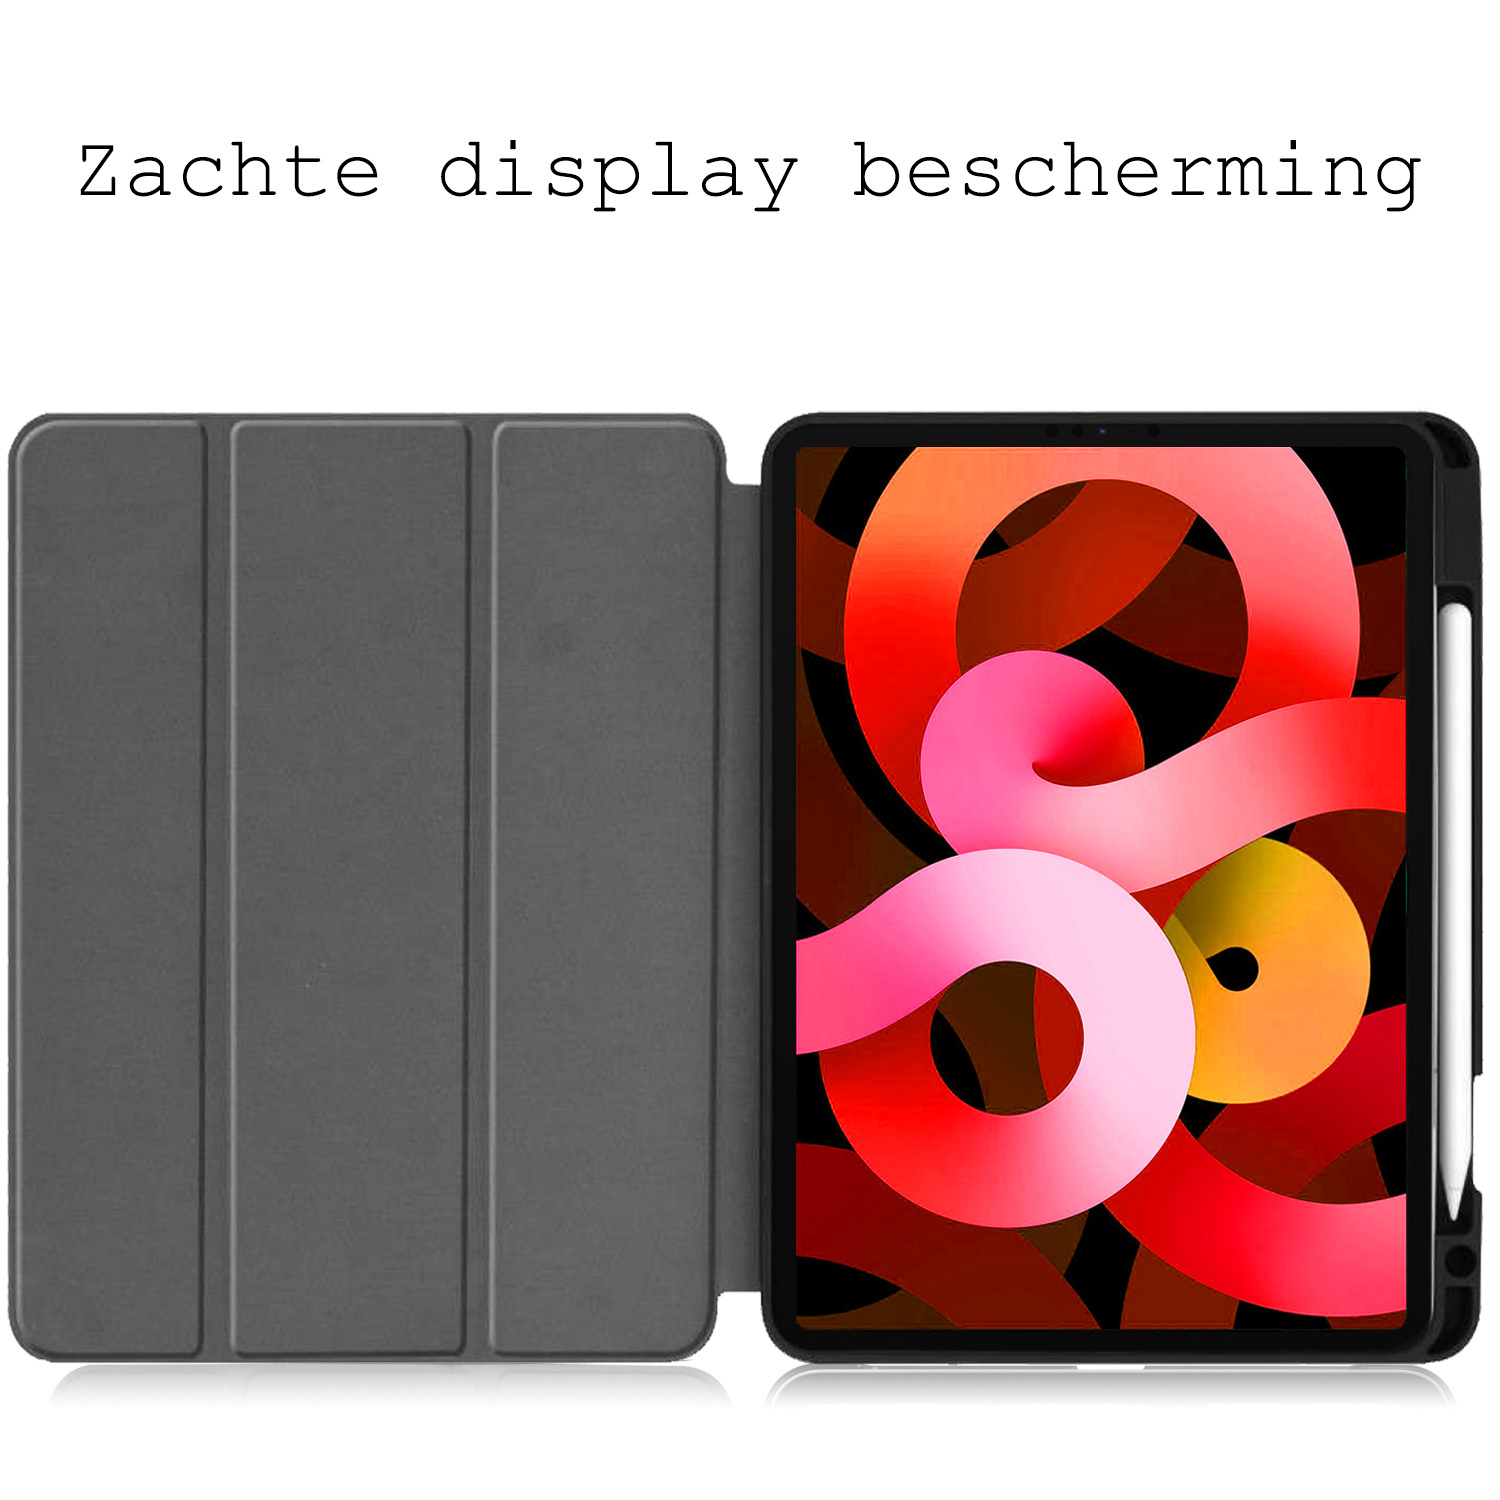 BASEY. iPad Air 5 2022 Hoes Met Screenprotector Don't Touch Me - iPad Air 5 2022 Hoesje Uitsparing Apple Pencil Hard Cover Don't Touch Me - iPad Air 5 2022 Bookcase Hoes Don't Touch Me